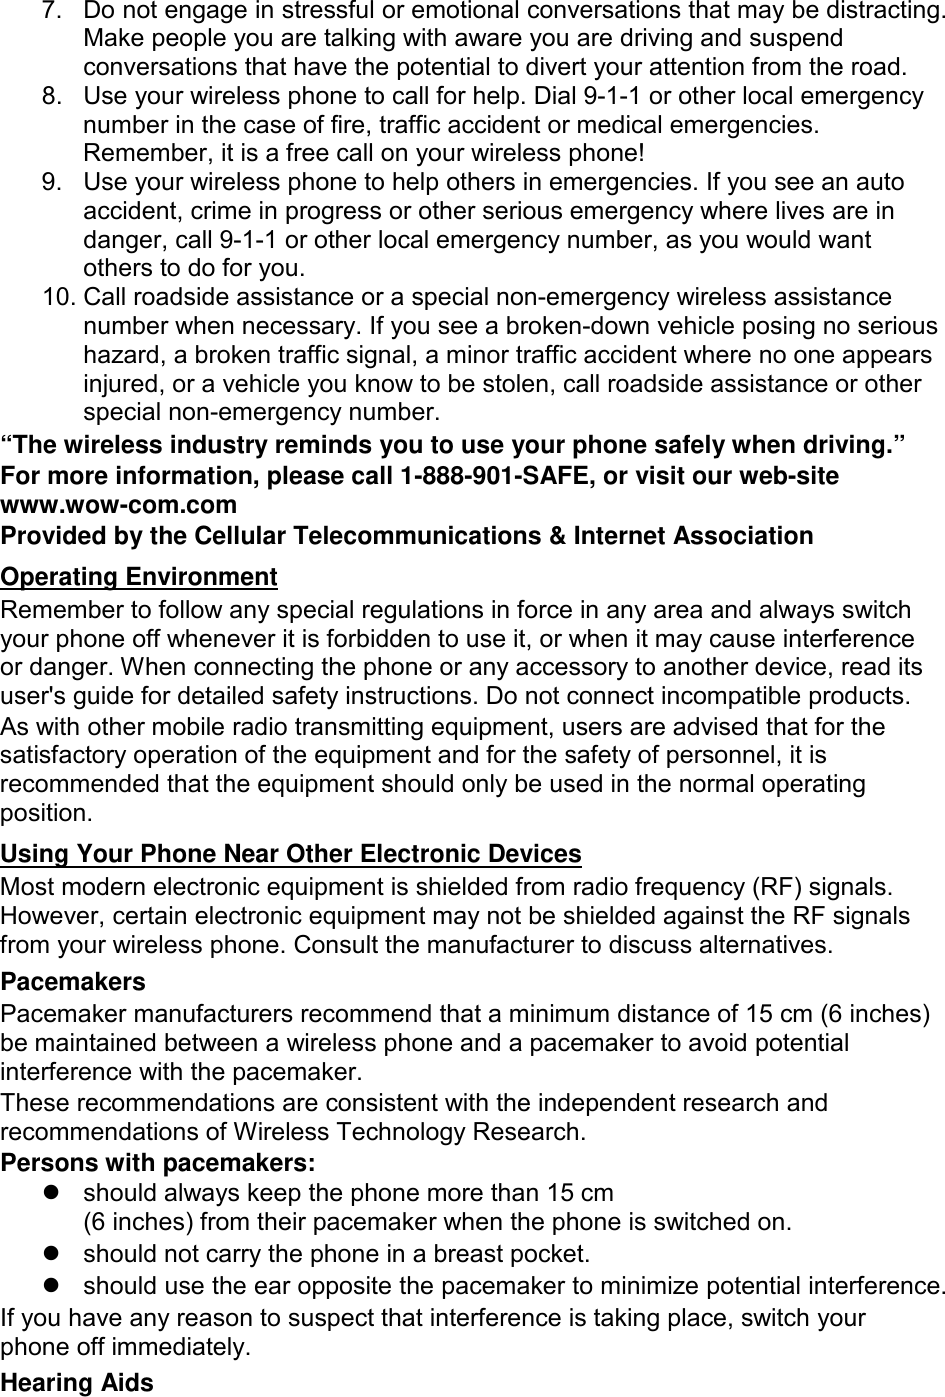 7. Do not engage in stressful or emotional conversations that may be distracting. Make people you are talking with aware you are driving and suspend conversations that have the potential to divert your attention from the road. 8. Use your wireless phone to call for help. Dial 9-1-1 or other local emergency number in the case of fire, traffic accident or medical emergencies. Remember, it is a free call on your wireless phone! 9. Use your wireless phone to help others in emergencies. If you see an auto accident, crime in progress or other serious emergency where lives are in danger, call 9-1-1 or other local emergency number, as you would want others to do for you. 10. Call roadside assistance or a special non-emergency wireless assistance number when necessary. If you see a broken-down vehicle posing no serious hazard, a broken traffic signal, a minor traffic accident where no one appears injured, or a vehicle you know to be stolen, call roadside assistance or other special non-emergency number. “The wireless industry reminds you to use your phone safely when driving.” For more information, please call 1-888-901-SAFE, or visit our web-site www.wow-com.com Provided by the Cellular Telecommunications &amp; Internet Association Remember to follow any special regulations in force in any area and always switch your phone off whenever it is forbidden to use it, or when it may cause interference or danger. When connecting the phone or any accessory to another device, read its user&apos;s guide for detailed safety instructions. Do not connect incompatible products. Operating Environment As with other mobile radio transmitting equipment, users are advised that for the satisfactory operation of the equipment and for the safety of personnel, it is recommended that the equipment should only be used in the normal operating position. Most modern electronic equipment is shielded from radio frequency (RF) signals. However, certain electronic equipment may not be shielded against the RF signals from your wireless phone. Consult the manufacturer to discuss alternatives. Using Your Phone Near Other Electronic Devices Pacemakers Pacemaker manufacturers recommend that a minimum distance of 15 cm (6 inches) be maintained between a wireless phone and a pacemaker to avoid potential interference with the pacemaker. These recommendations are consistent with the independent research and recommendations of Wireless Technology Research. Persons with pacemakers:  should always keep the phone more than 15 cm   (6 inches) from their pacemaker when the phone is switched on.  should not carry the phone in a breast pocket.  should use the ear opposite the pacemaker to minimize potential interference. If you have any reason to suspect that interference is taking place, switch your phone off immediately. Hearing Aids 